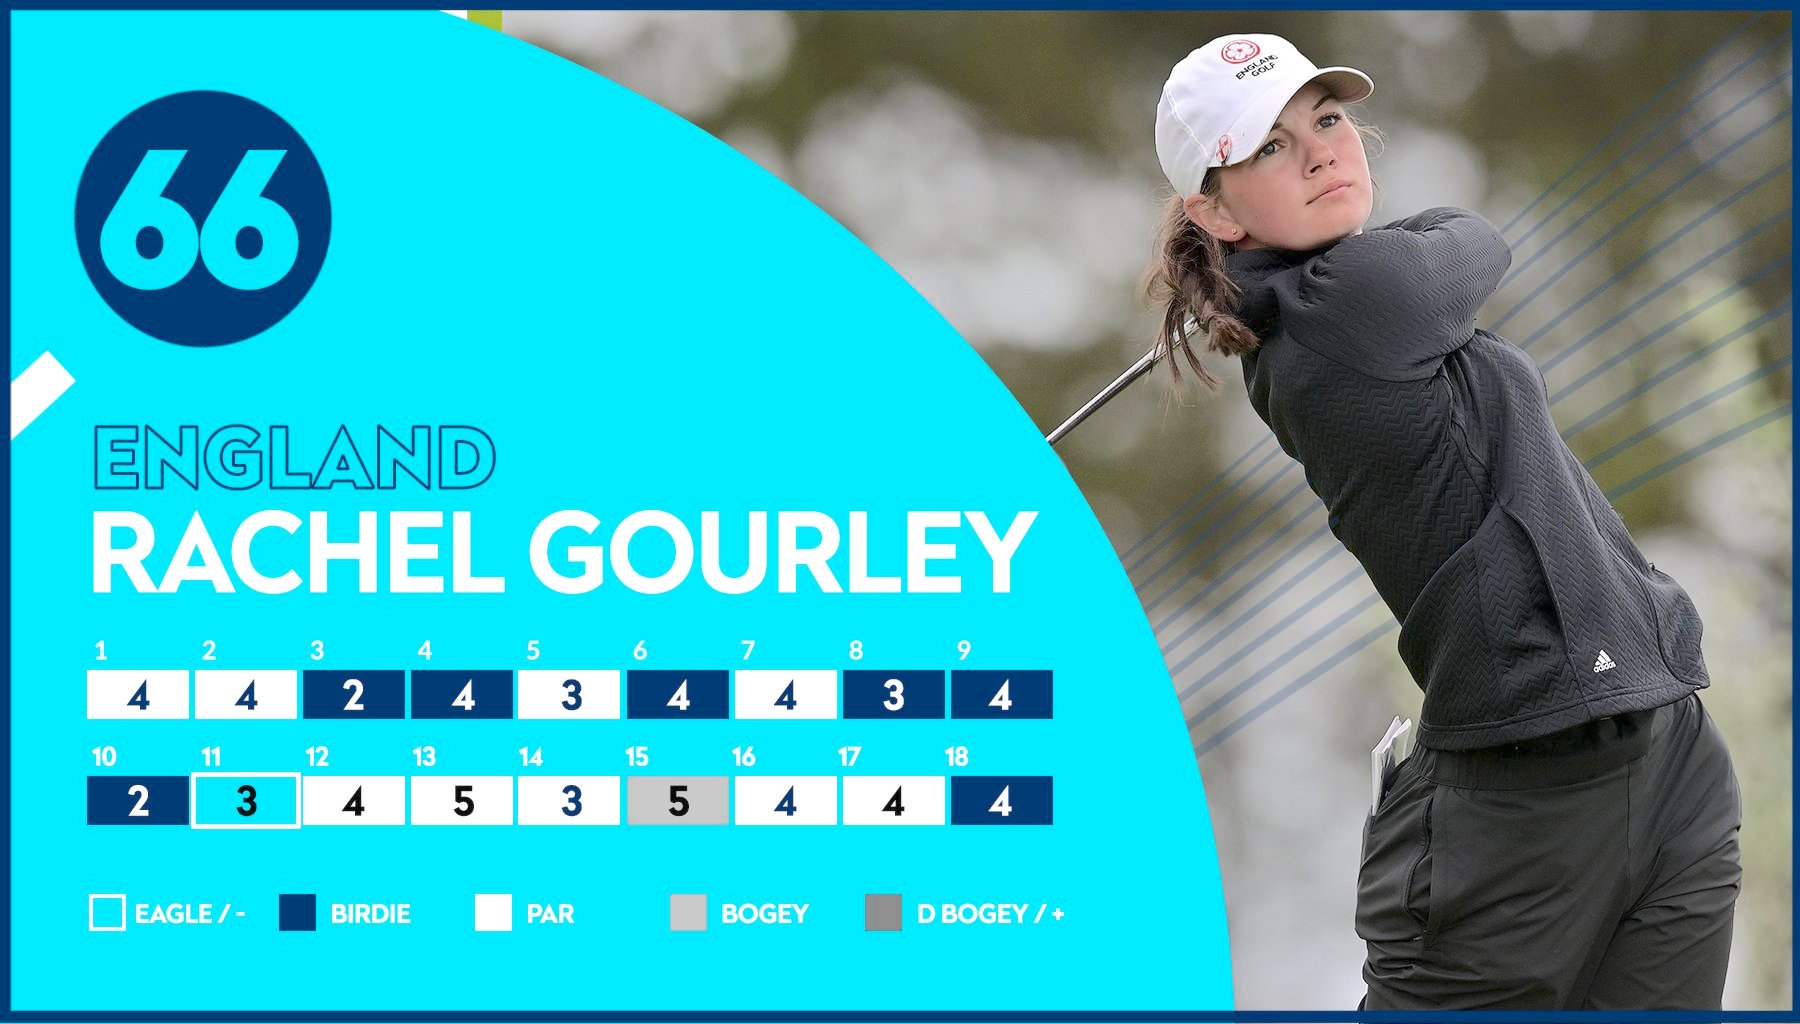 ROUTE 66: Rachel Gourley enjoys a stunning start by breaking the course record at Fulford